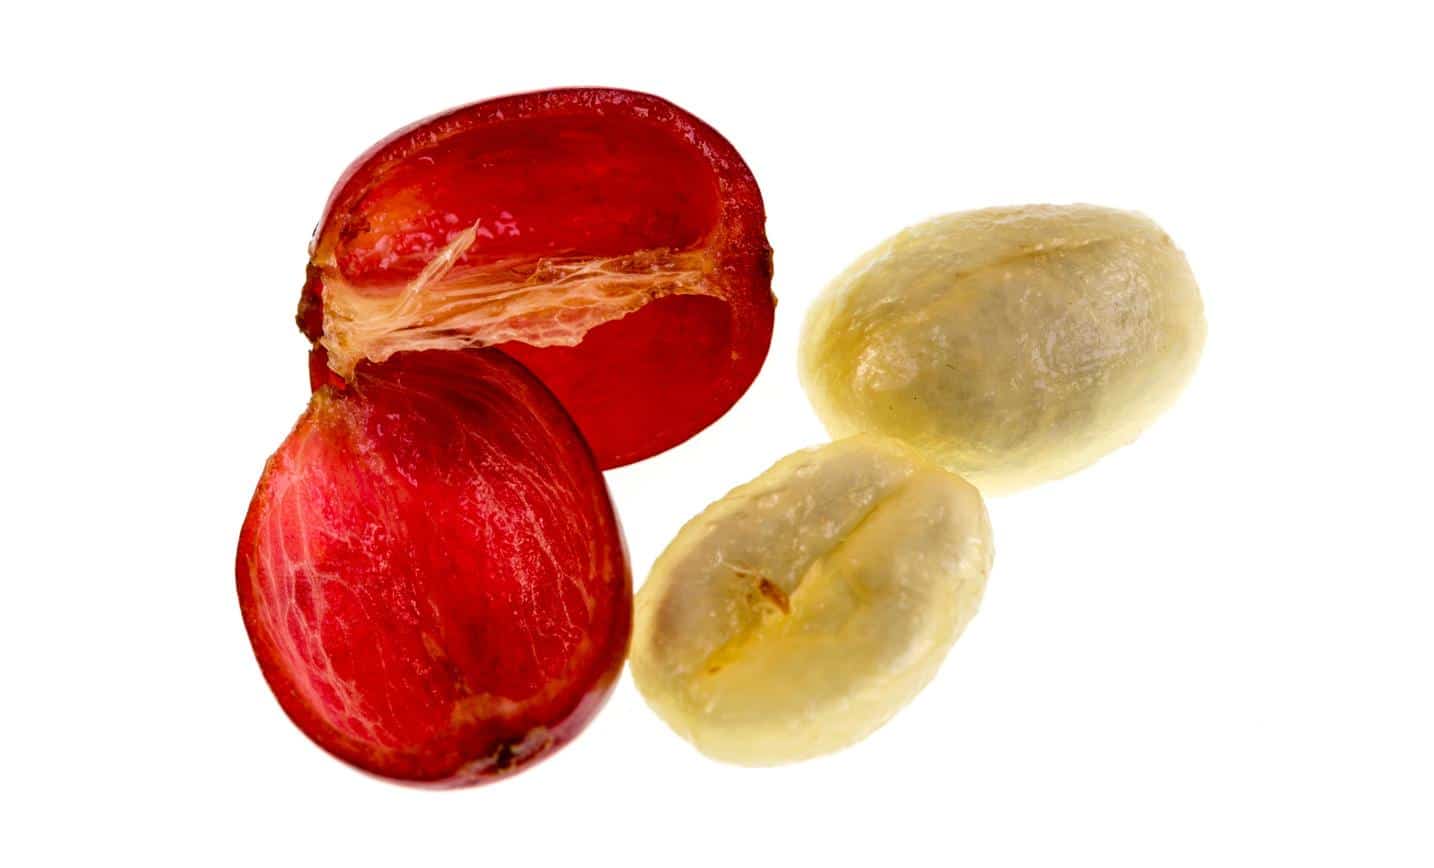 What is a coffee cherry?